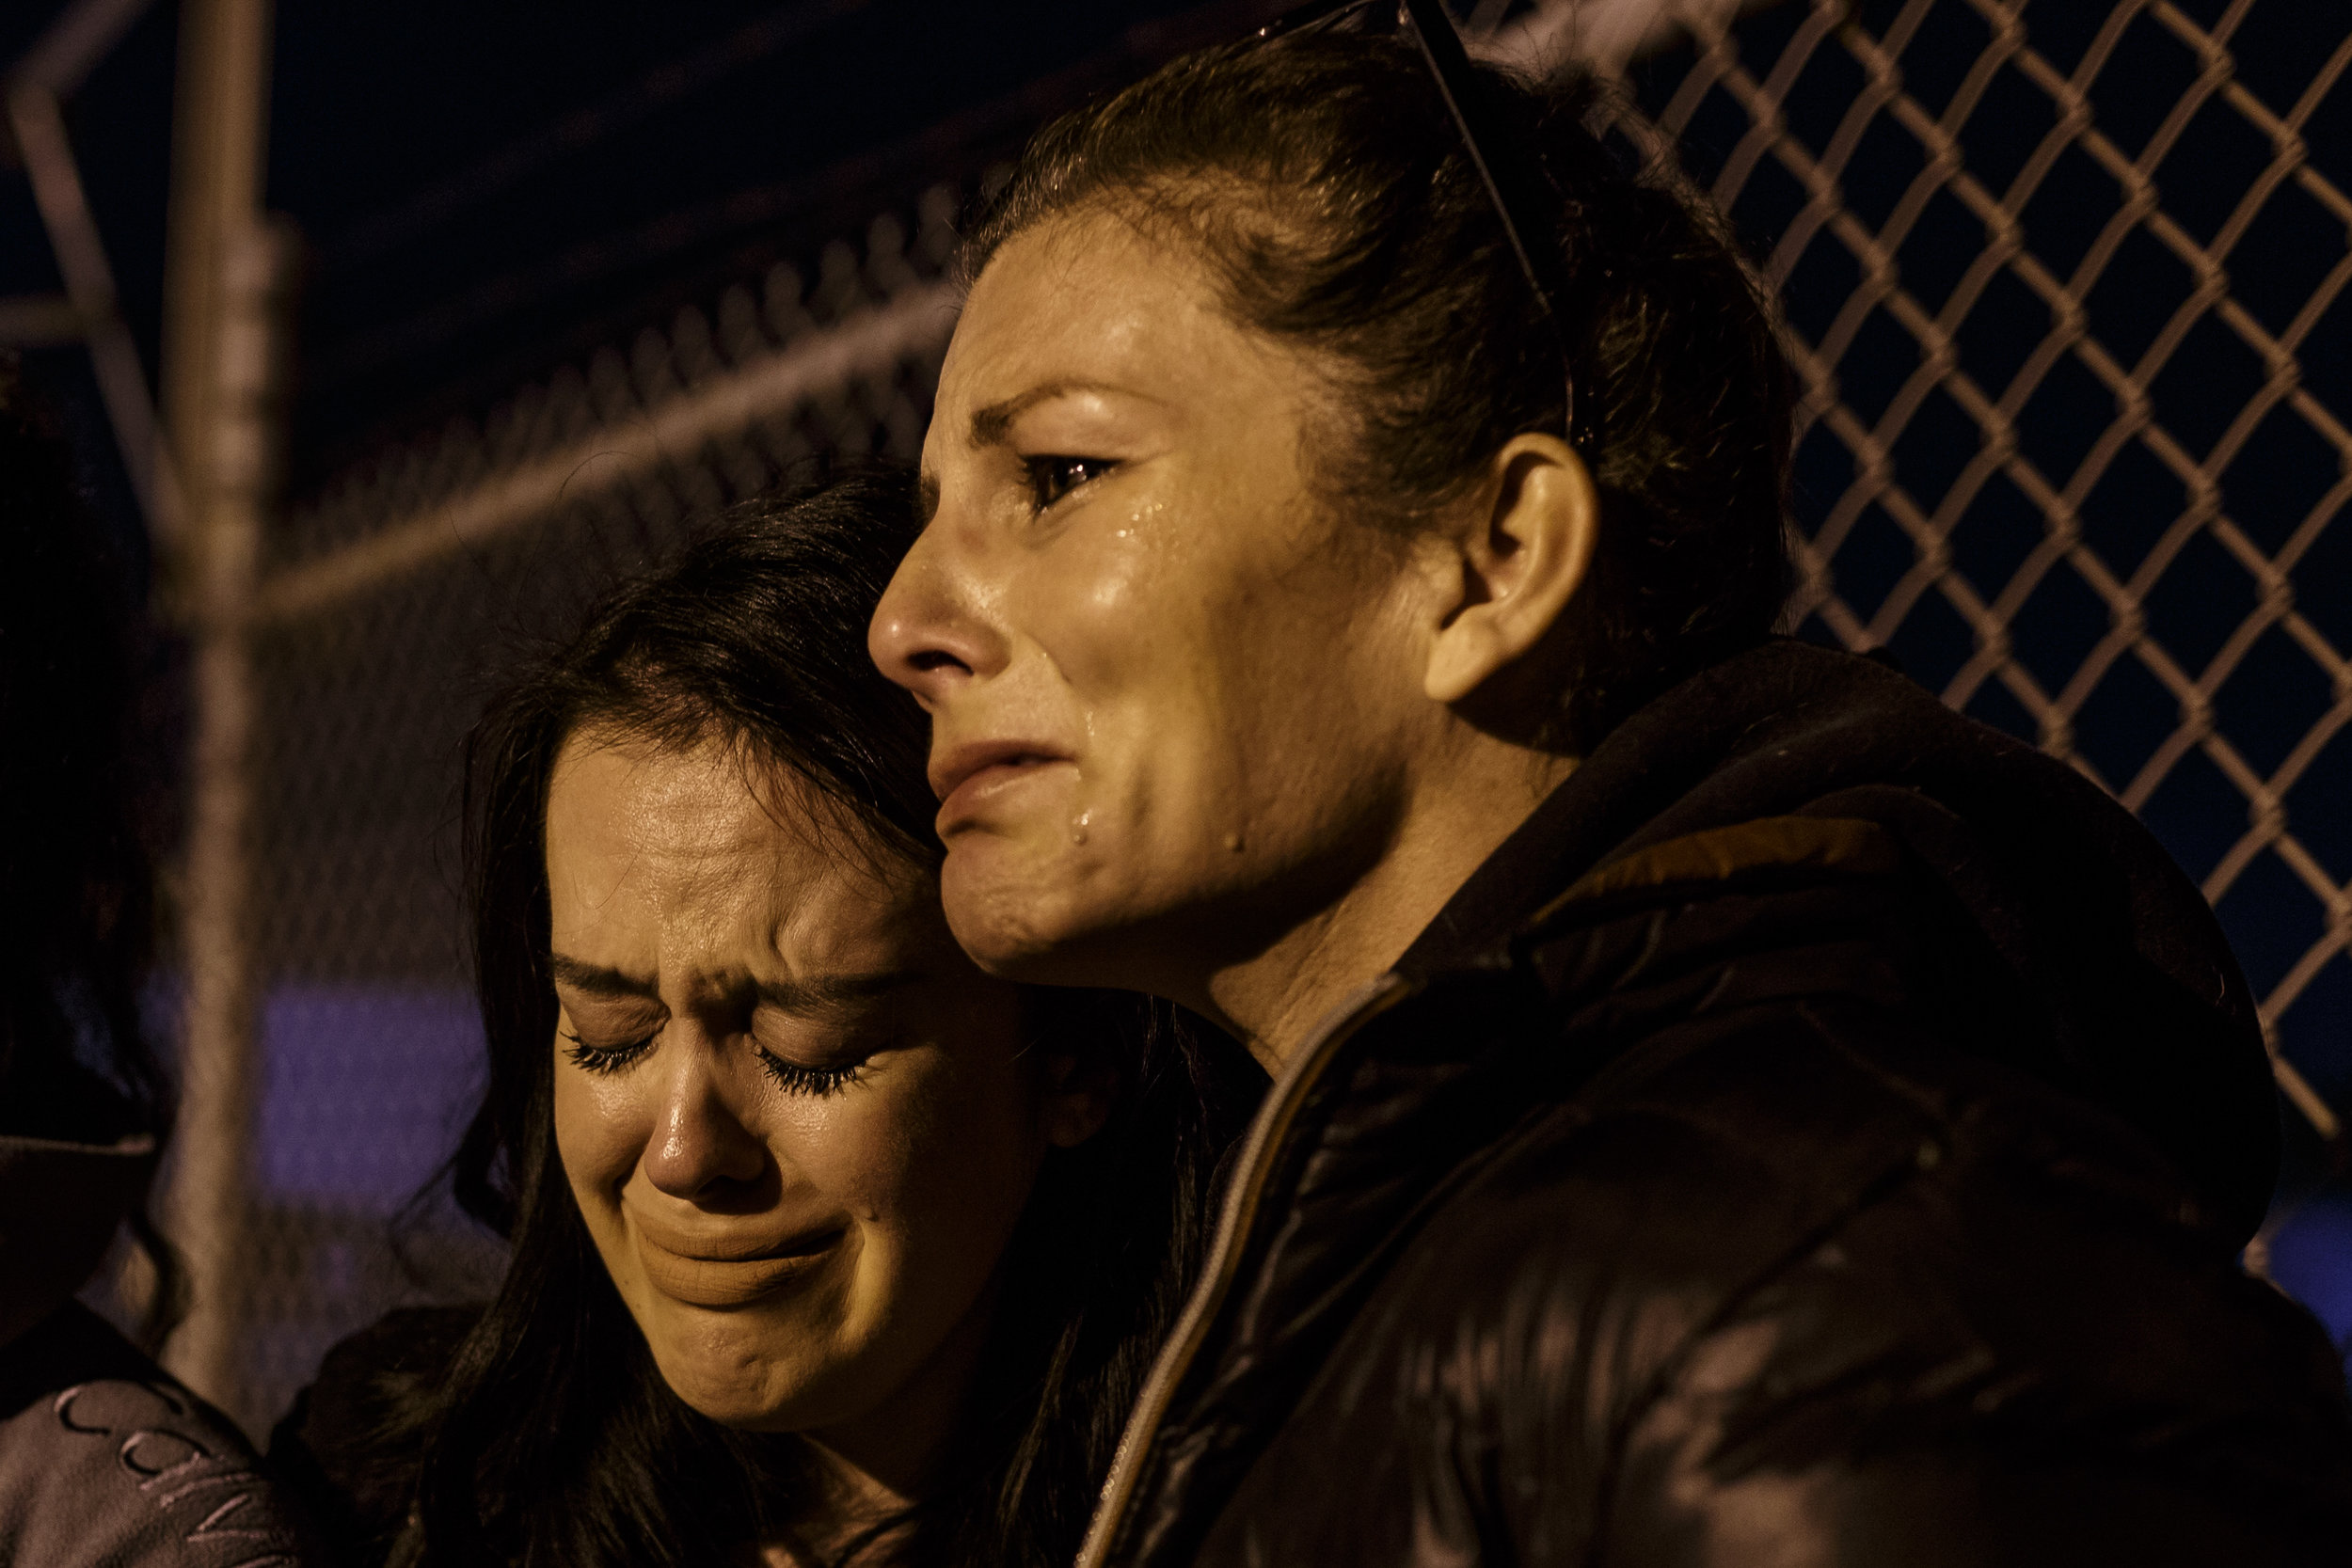  Jo McGuinness comforts Michelle Hill at a vigil for pigs held outside Farmer John, a slaughterhouse in Vernon, CA. Michelle recently became vegan and reconnected with Jo over social media - this is her first time at a vigil. March 22nd 2017 photo by